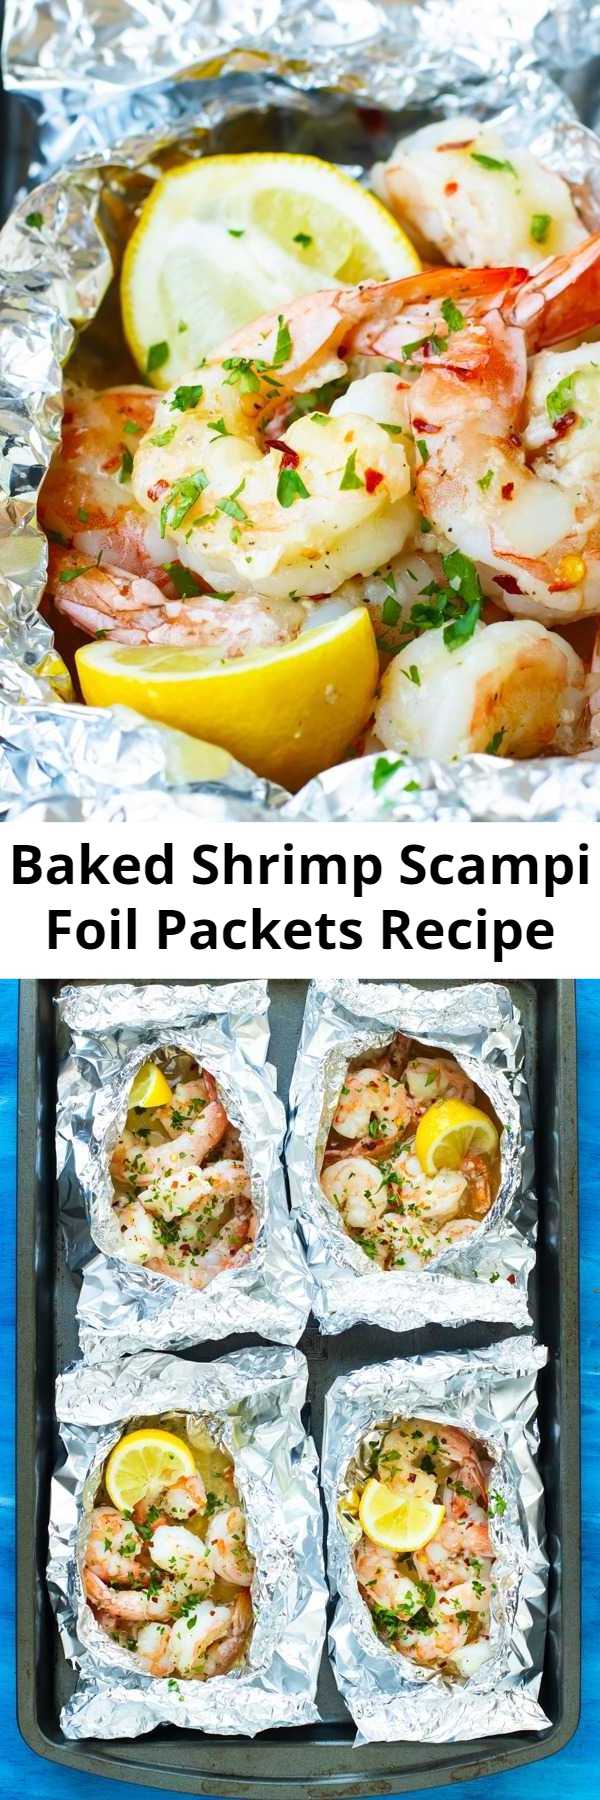 Baked Shrimp Scampi Foil Packets Recipe - Baked Shrimp Scampi is tossed in a delicious garlic and butter white wine sauce, made in convenient foil packets, and is healthy, low-carb, gluten-free, low-carb, and can be made Paleo and Whole30.  This easy weeknight dinner recipe comes together in under 20 minutes, too! #lowcarb #keto #shrimp #dinner